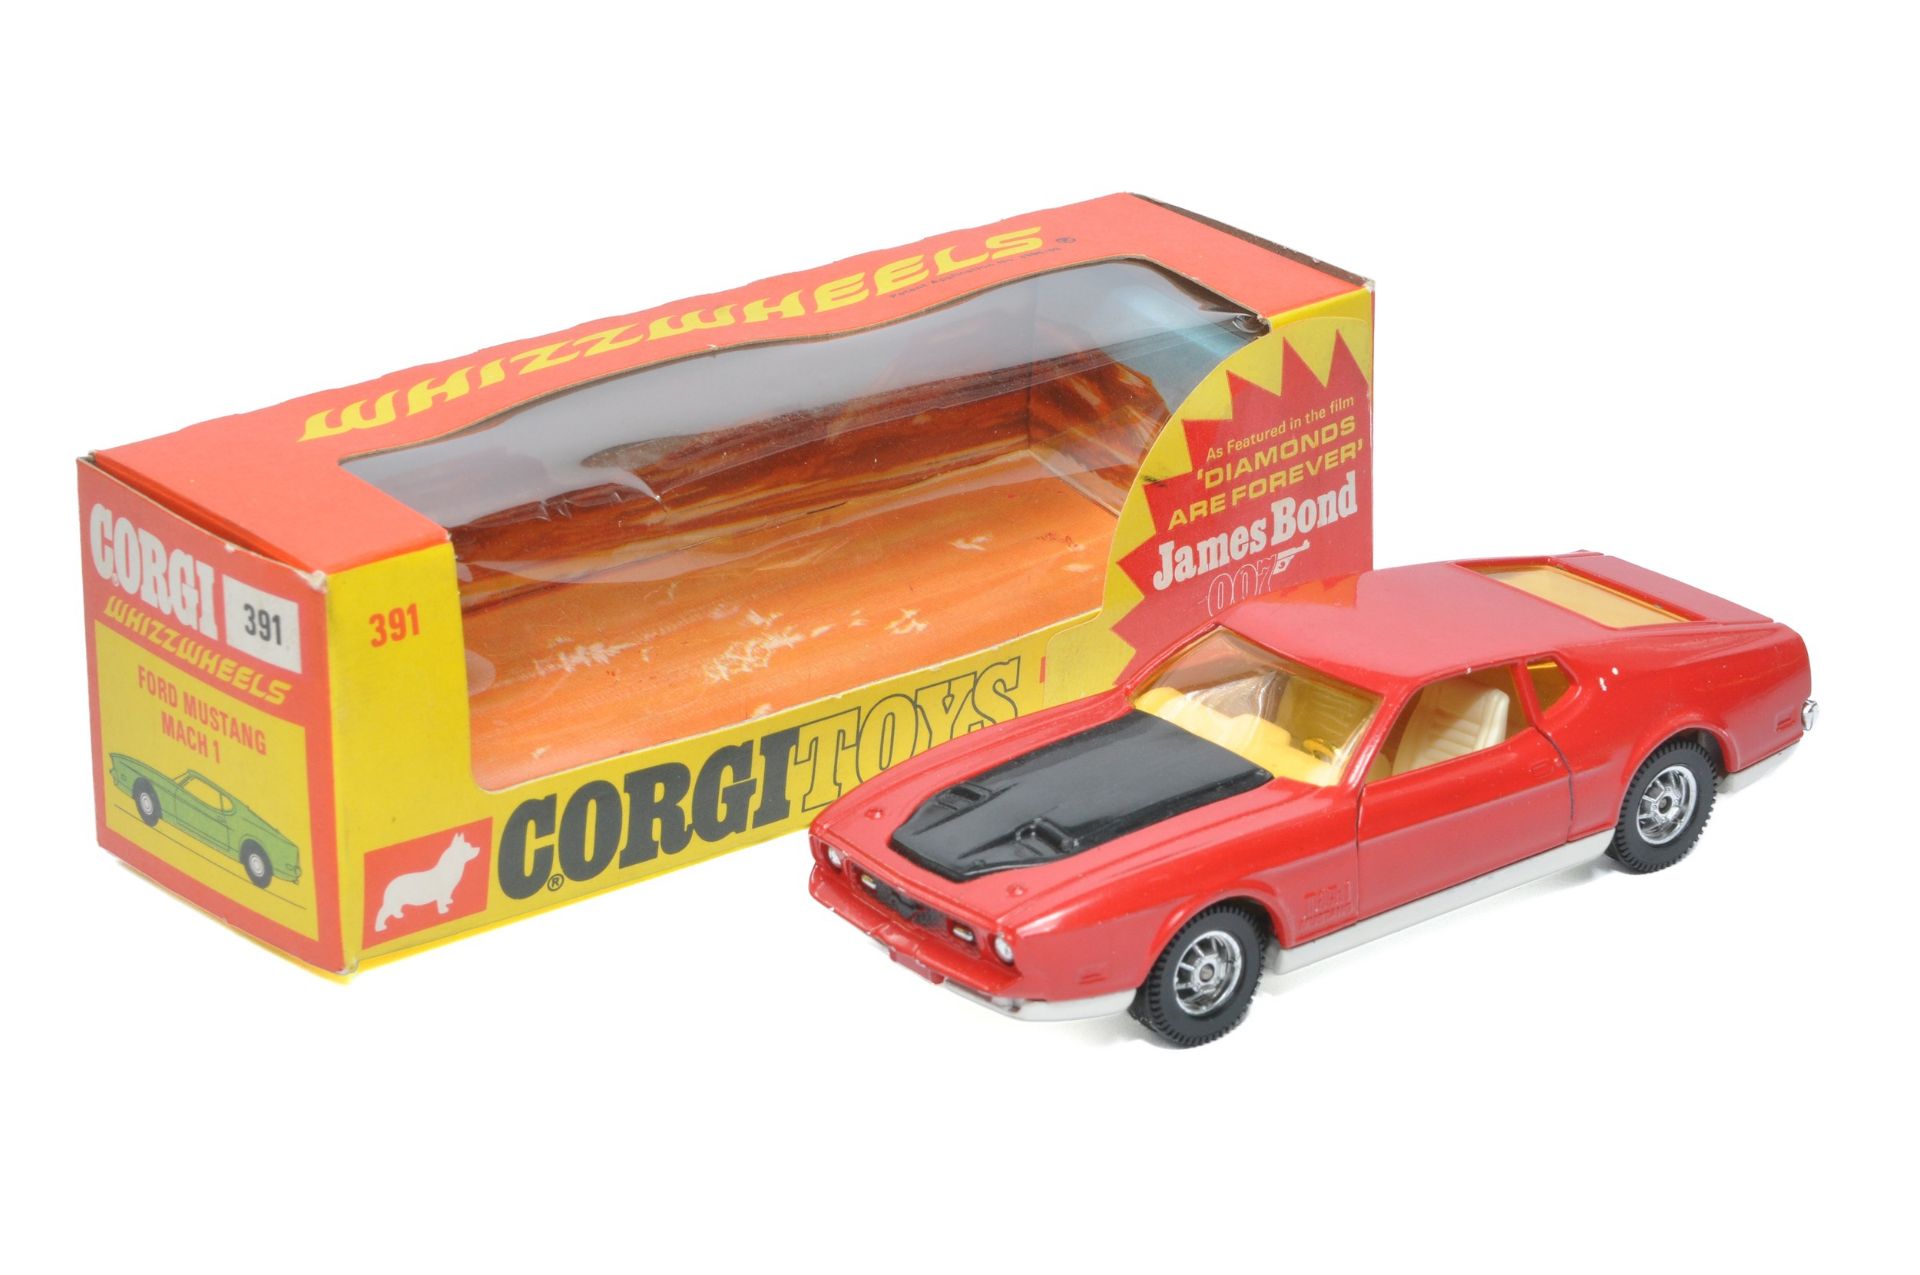 Corgi Whizzwheels No. 391 James Bond 007 Diamonds are forever Ford Mustang. Displays excellent